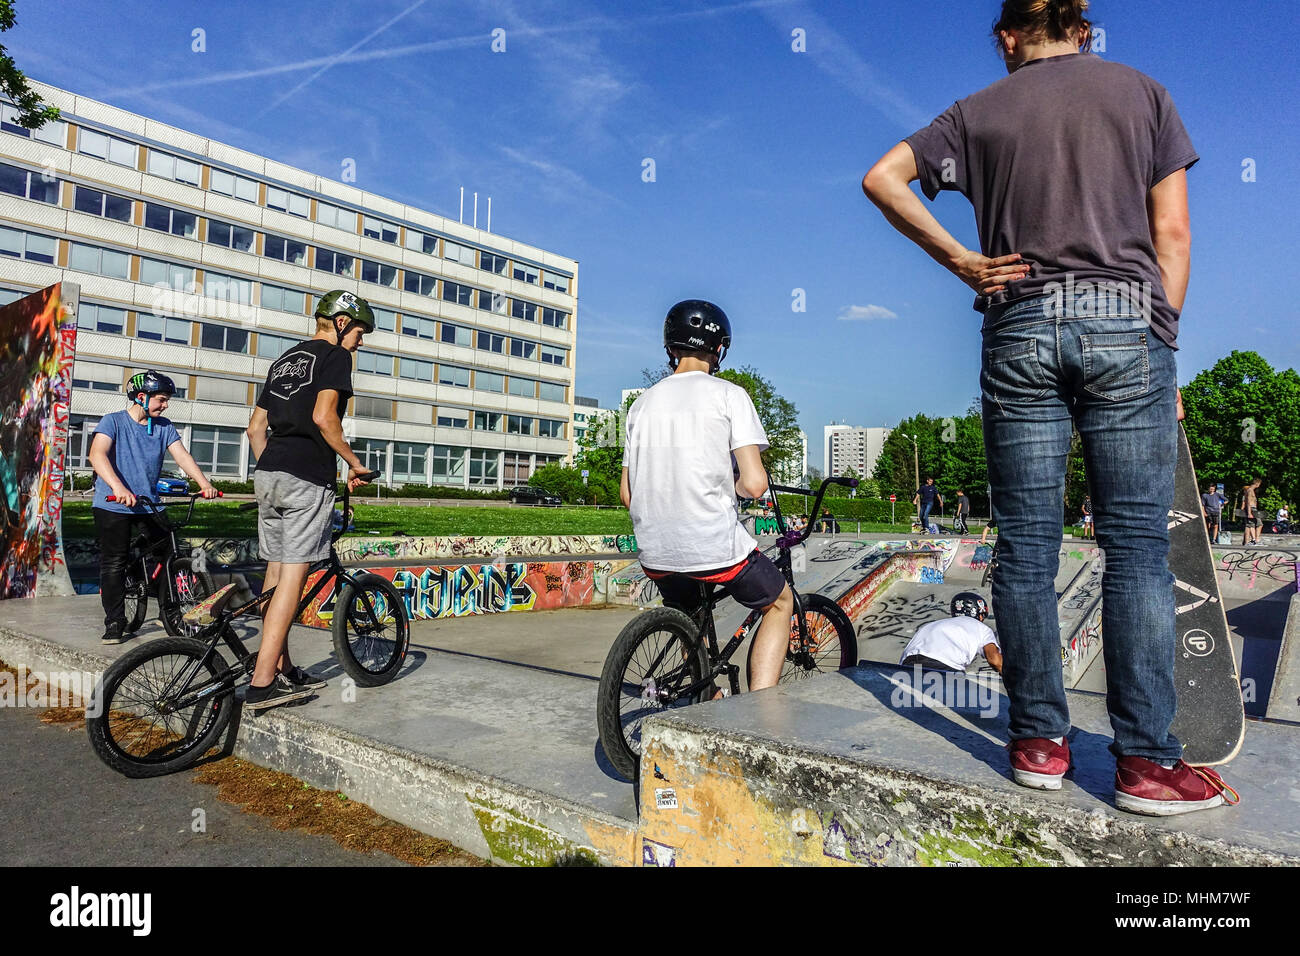 Teenagers bikes at an urban biking and Skate park Lingnerallee, Dresden, Saxony, Germany Stock Photo